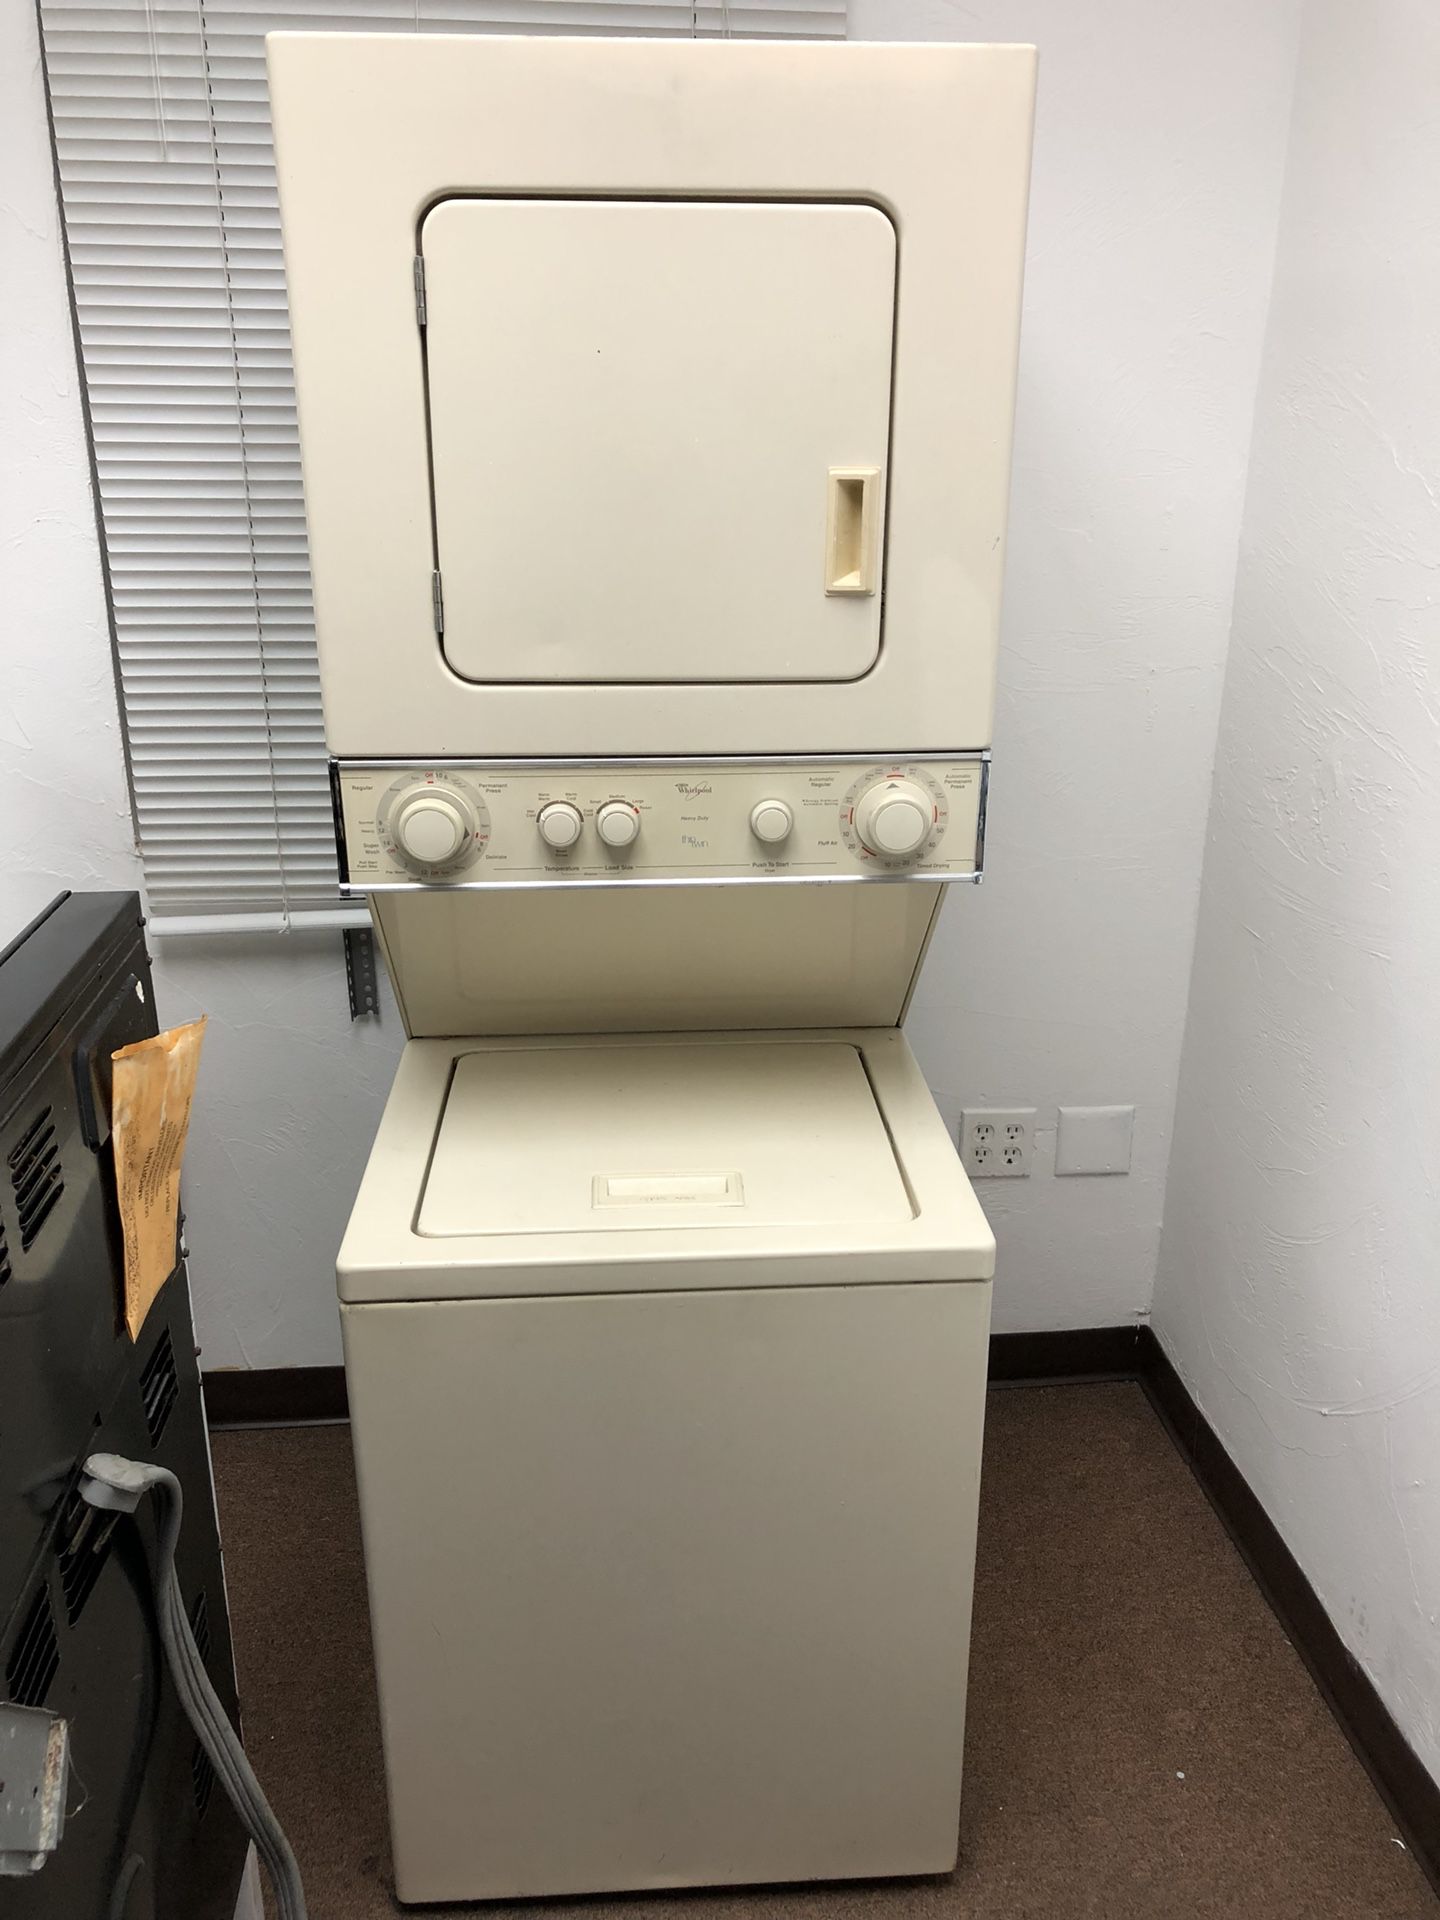 Surgir Sollozos Admirable Compact washer and dryer combo - Lavadora y Secadora compacta for Sale in  Miami, FL - OfferUp